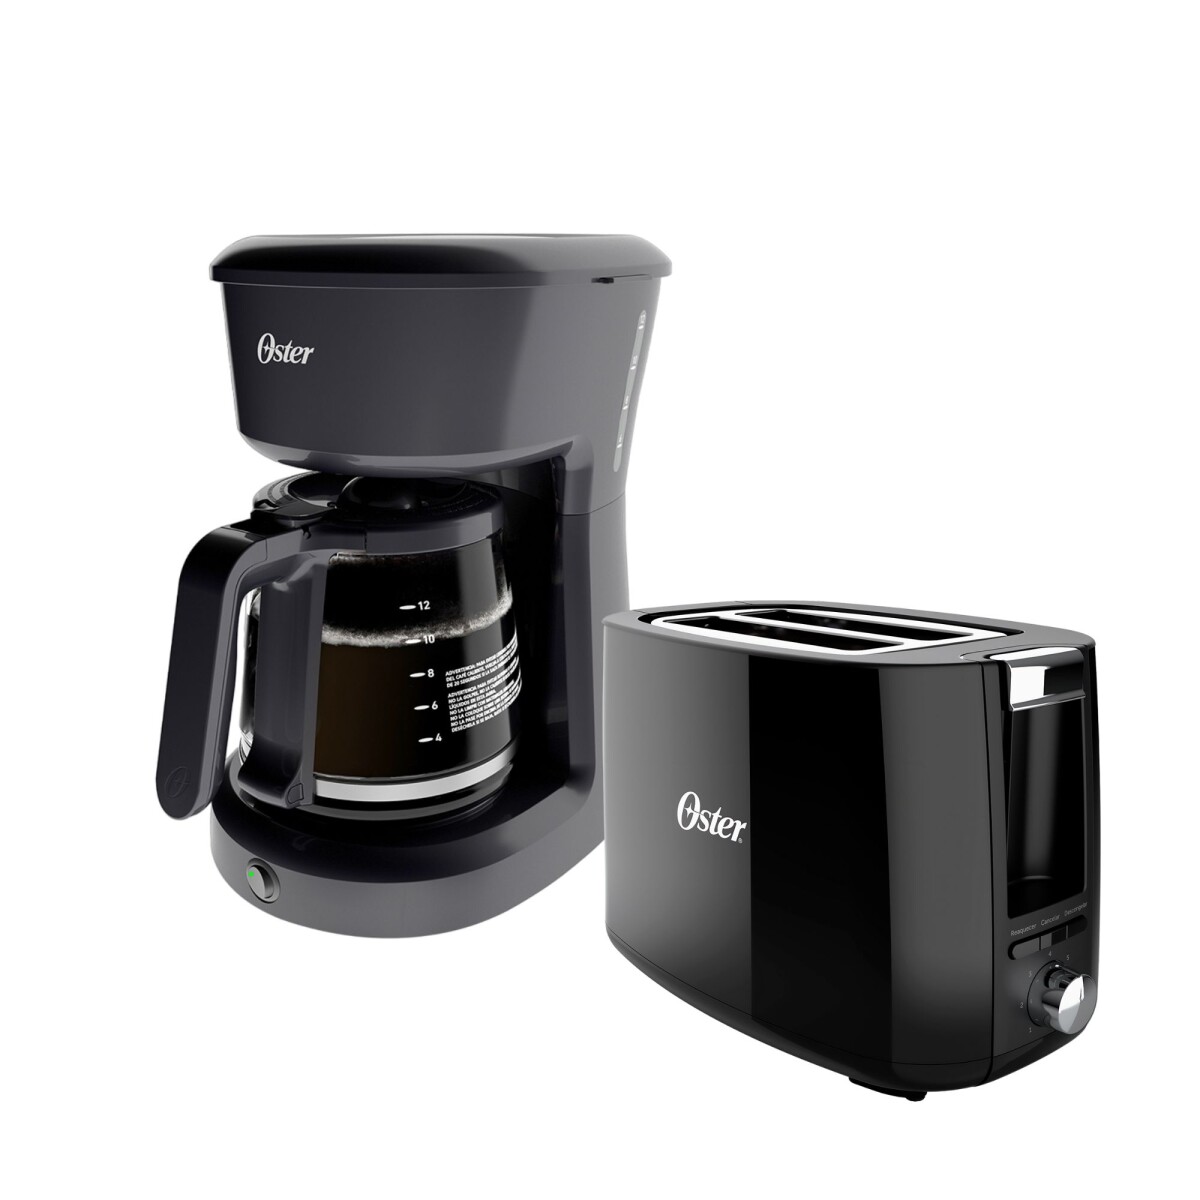 Kit Cafetera Oster 12 Tazas y Tostadora Oster Negra Simple Life 